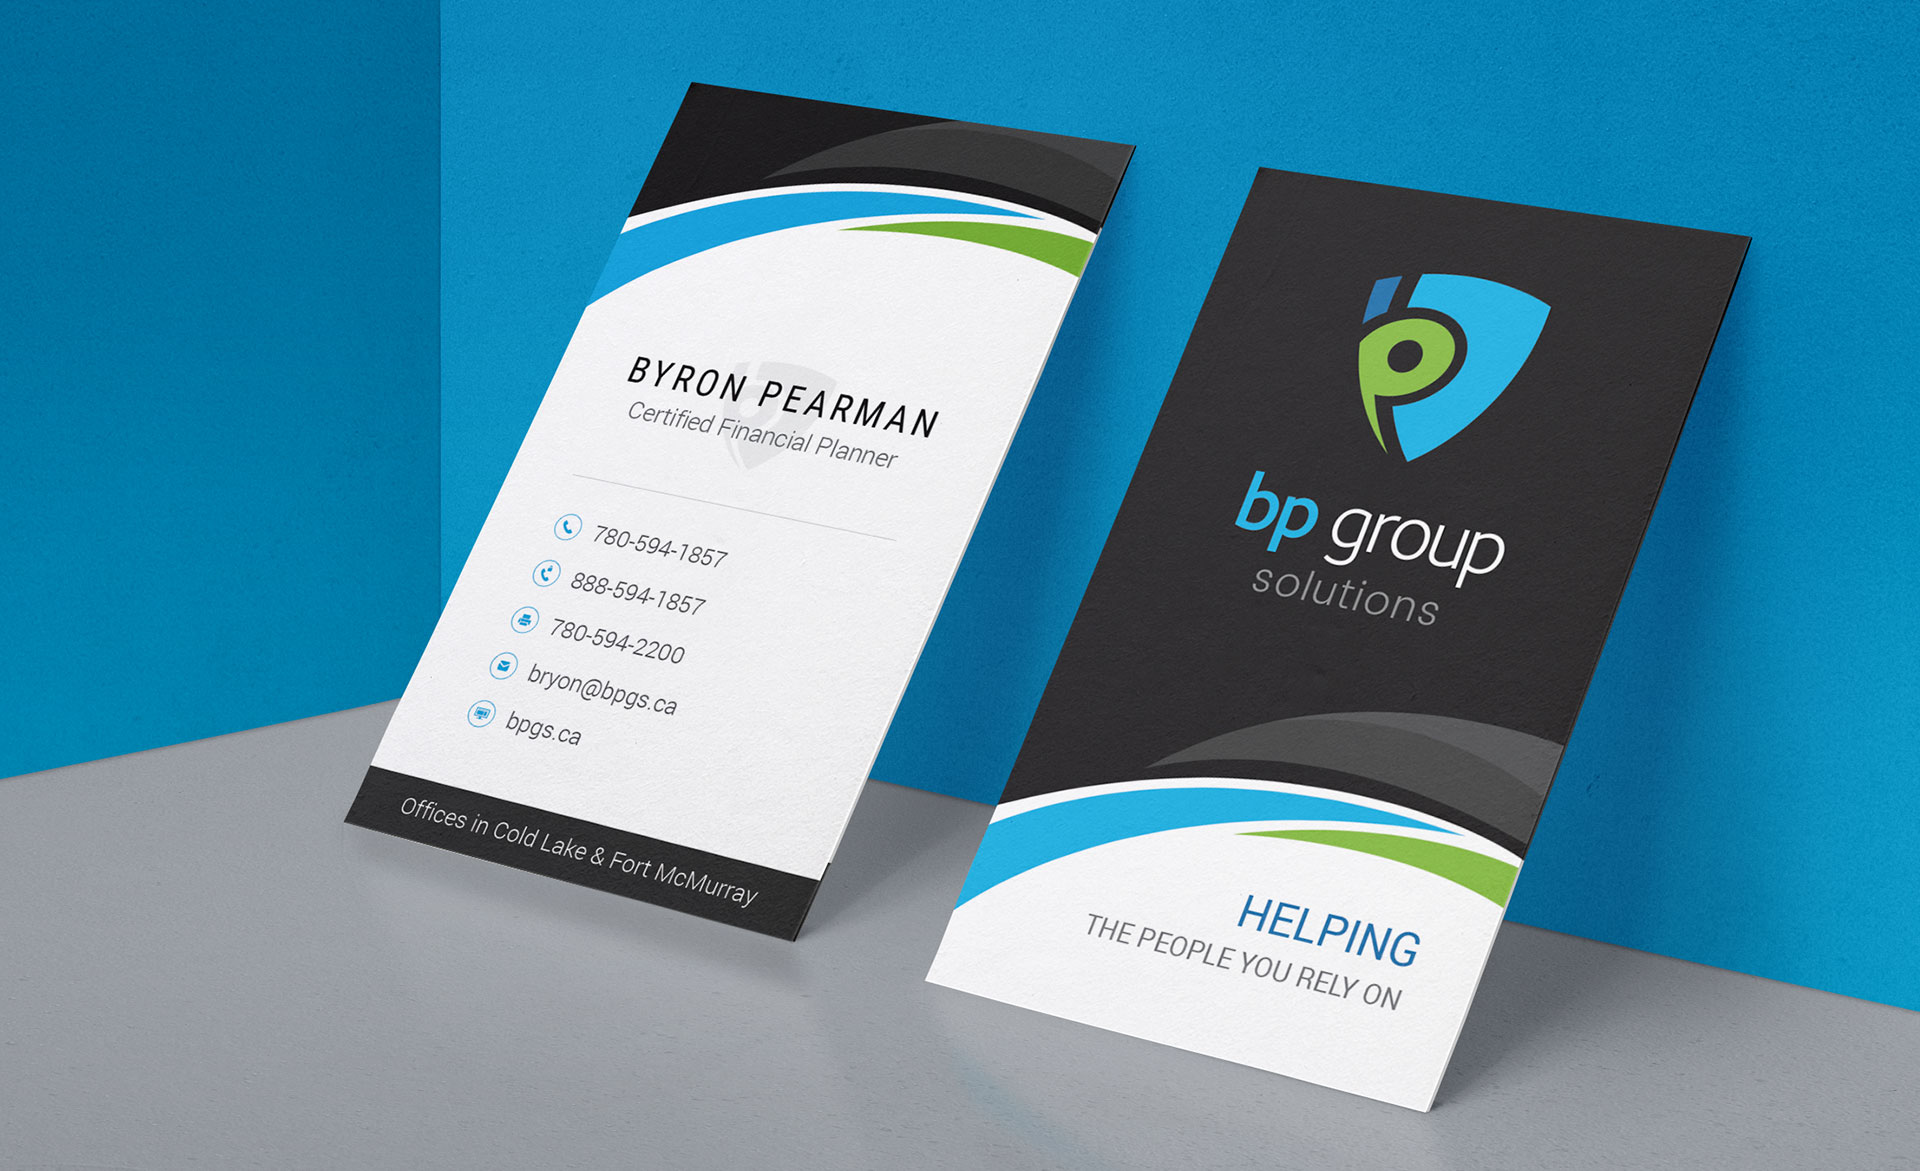 BP Group Solutions business cards2